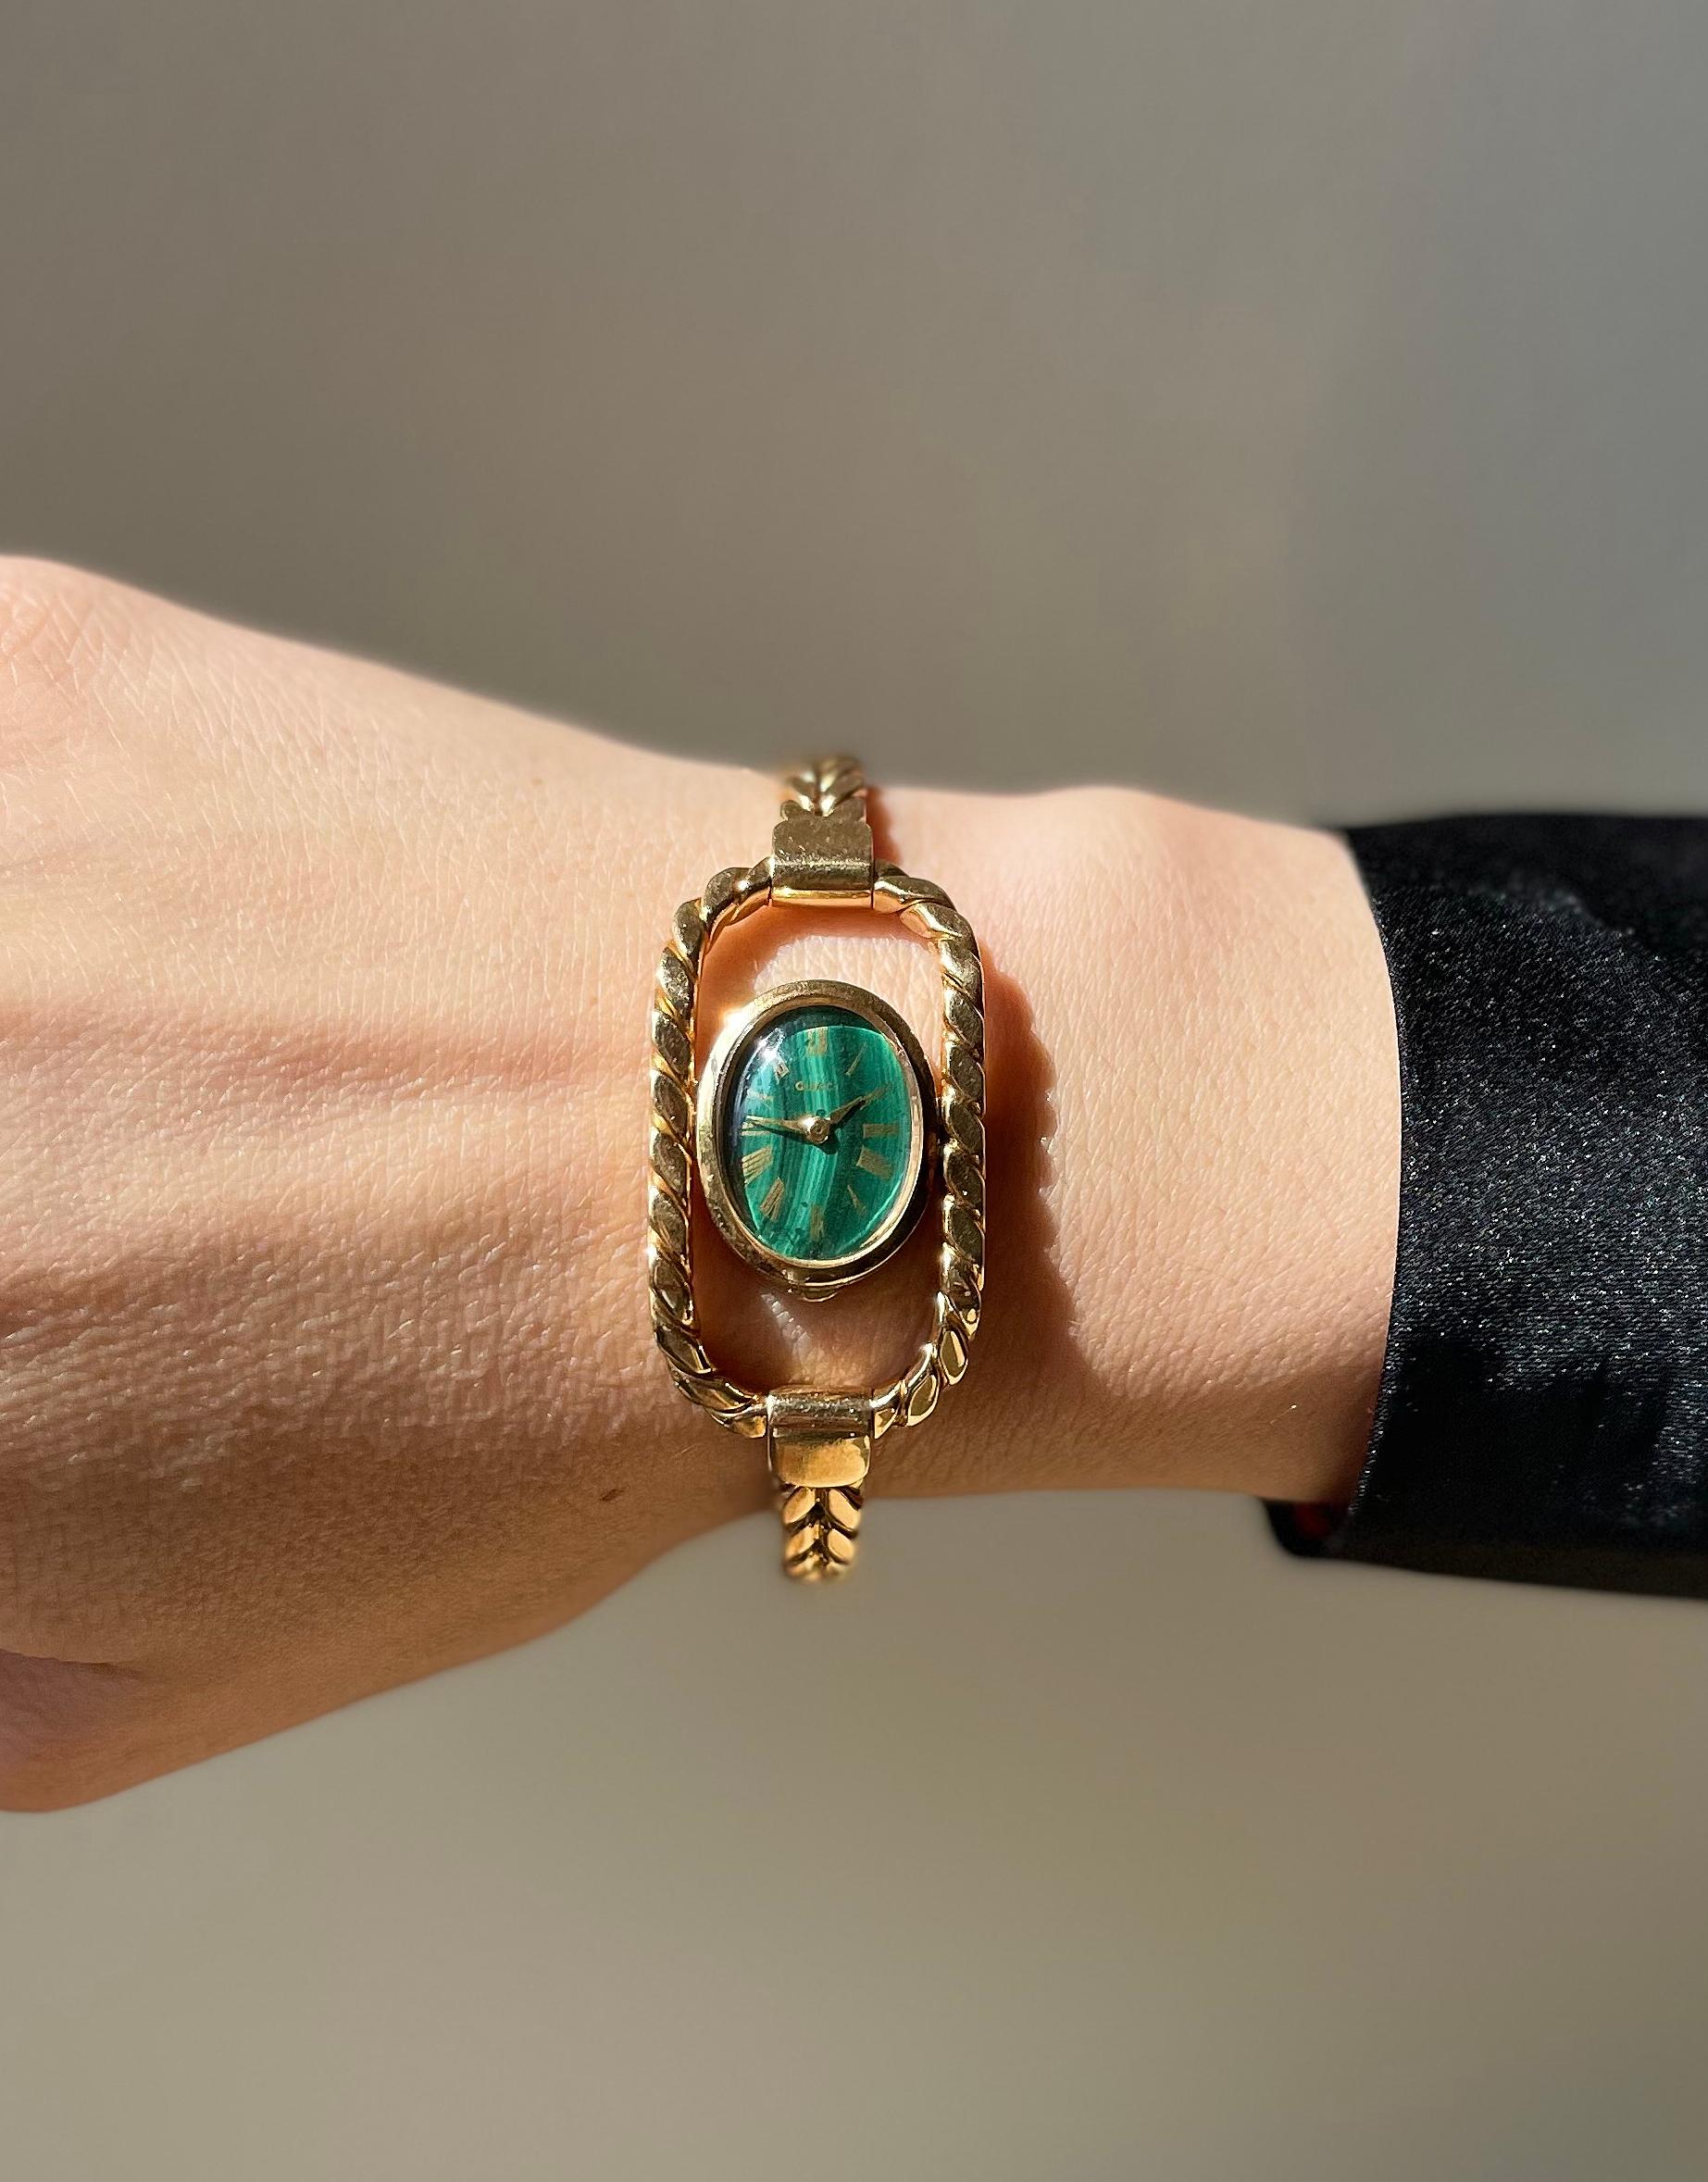 Vintage circa 1970s Gucci wrist watch in 18k gold, featuring malachite dial. The bracelet will fit an approx. 7